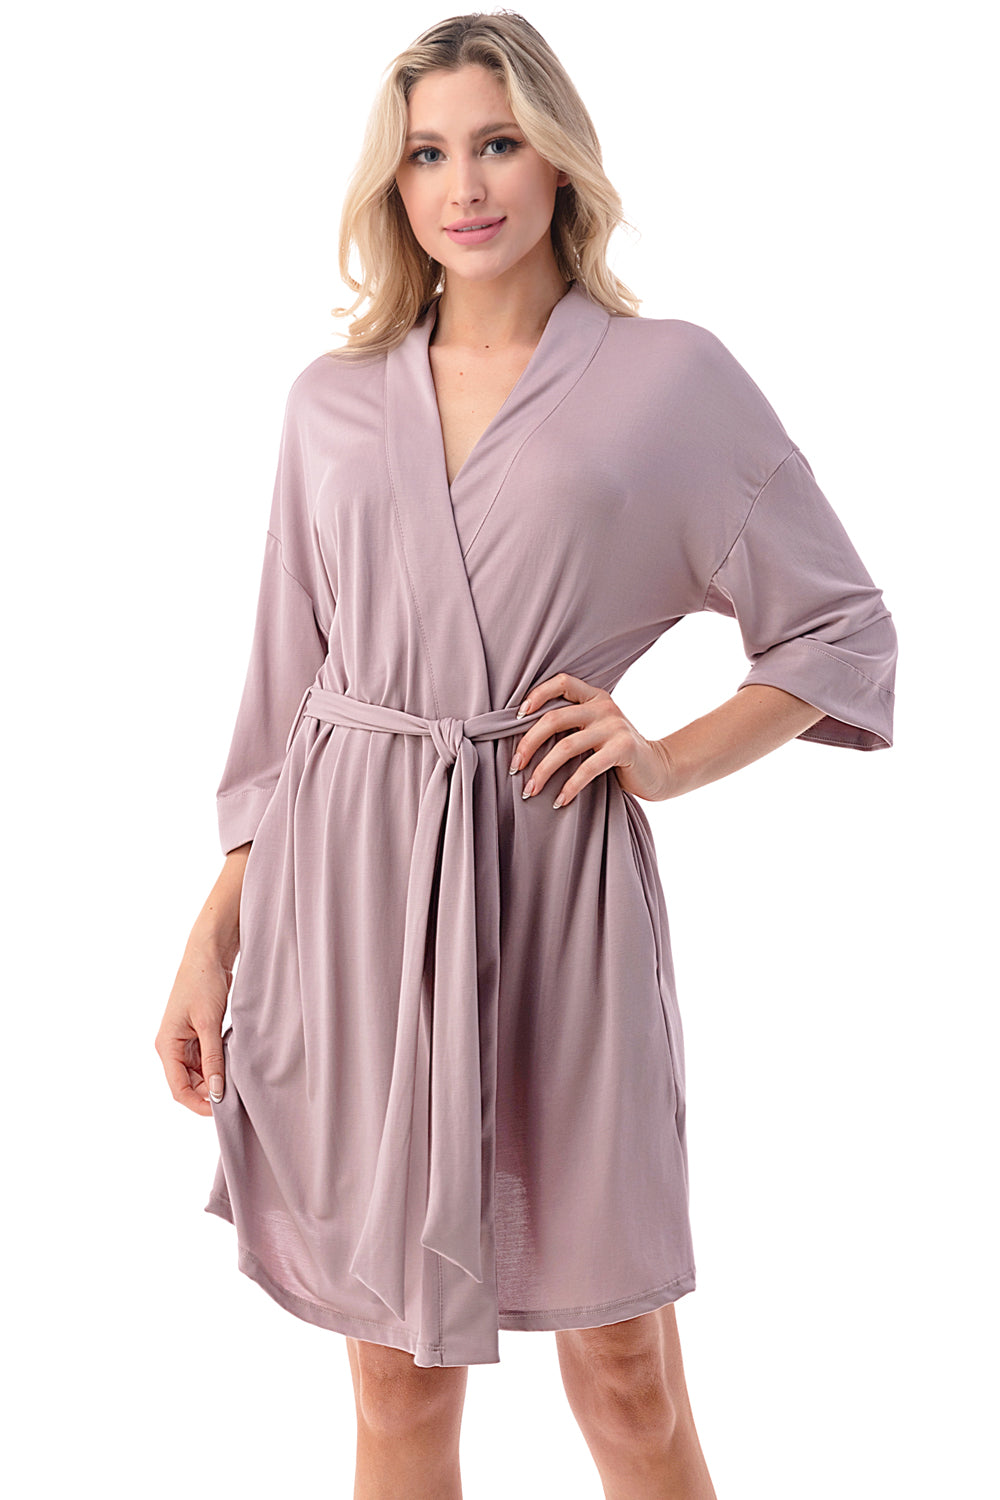 Dressing gowns – The Lingerie Bar